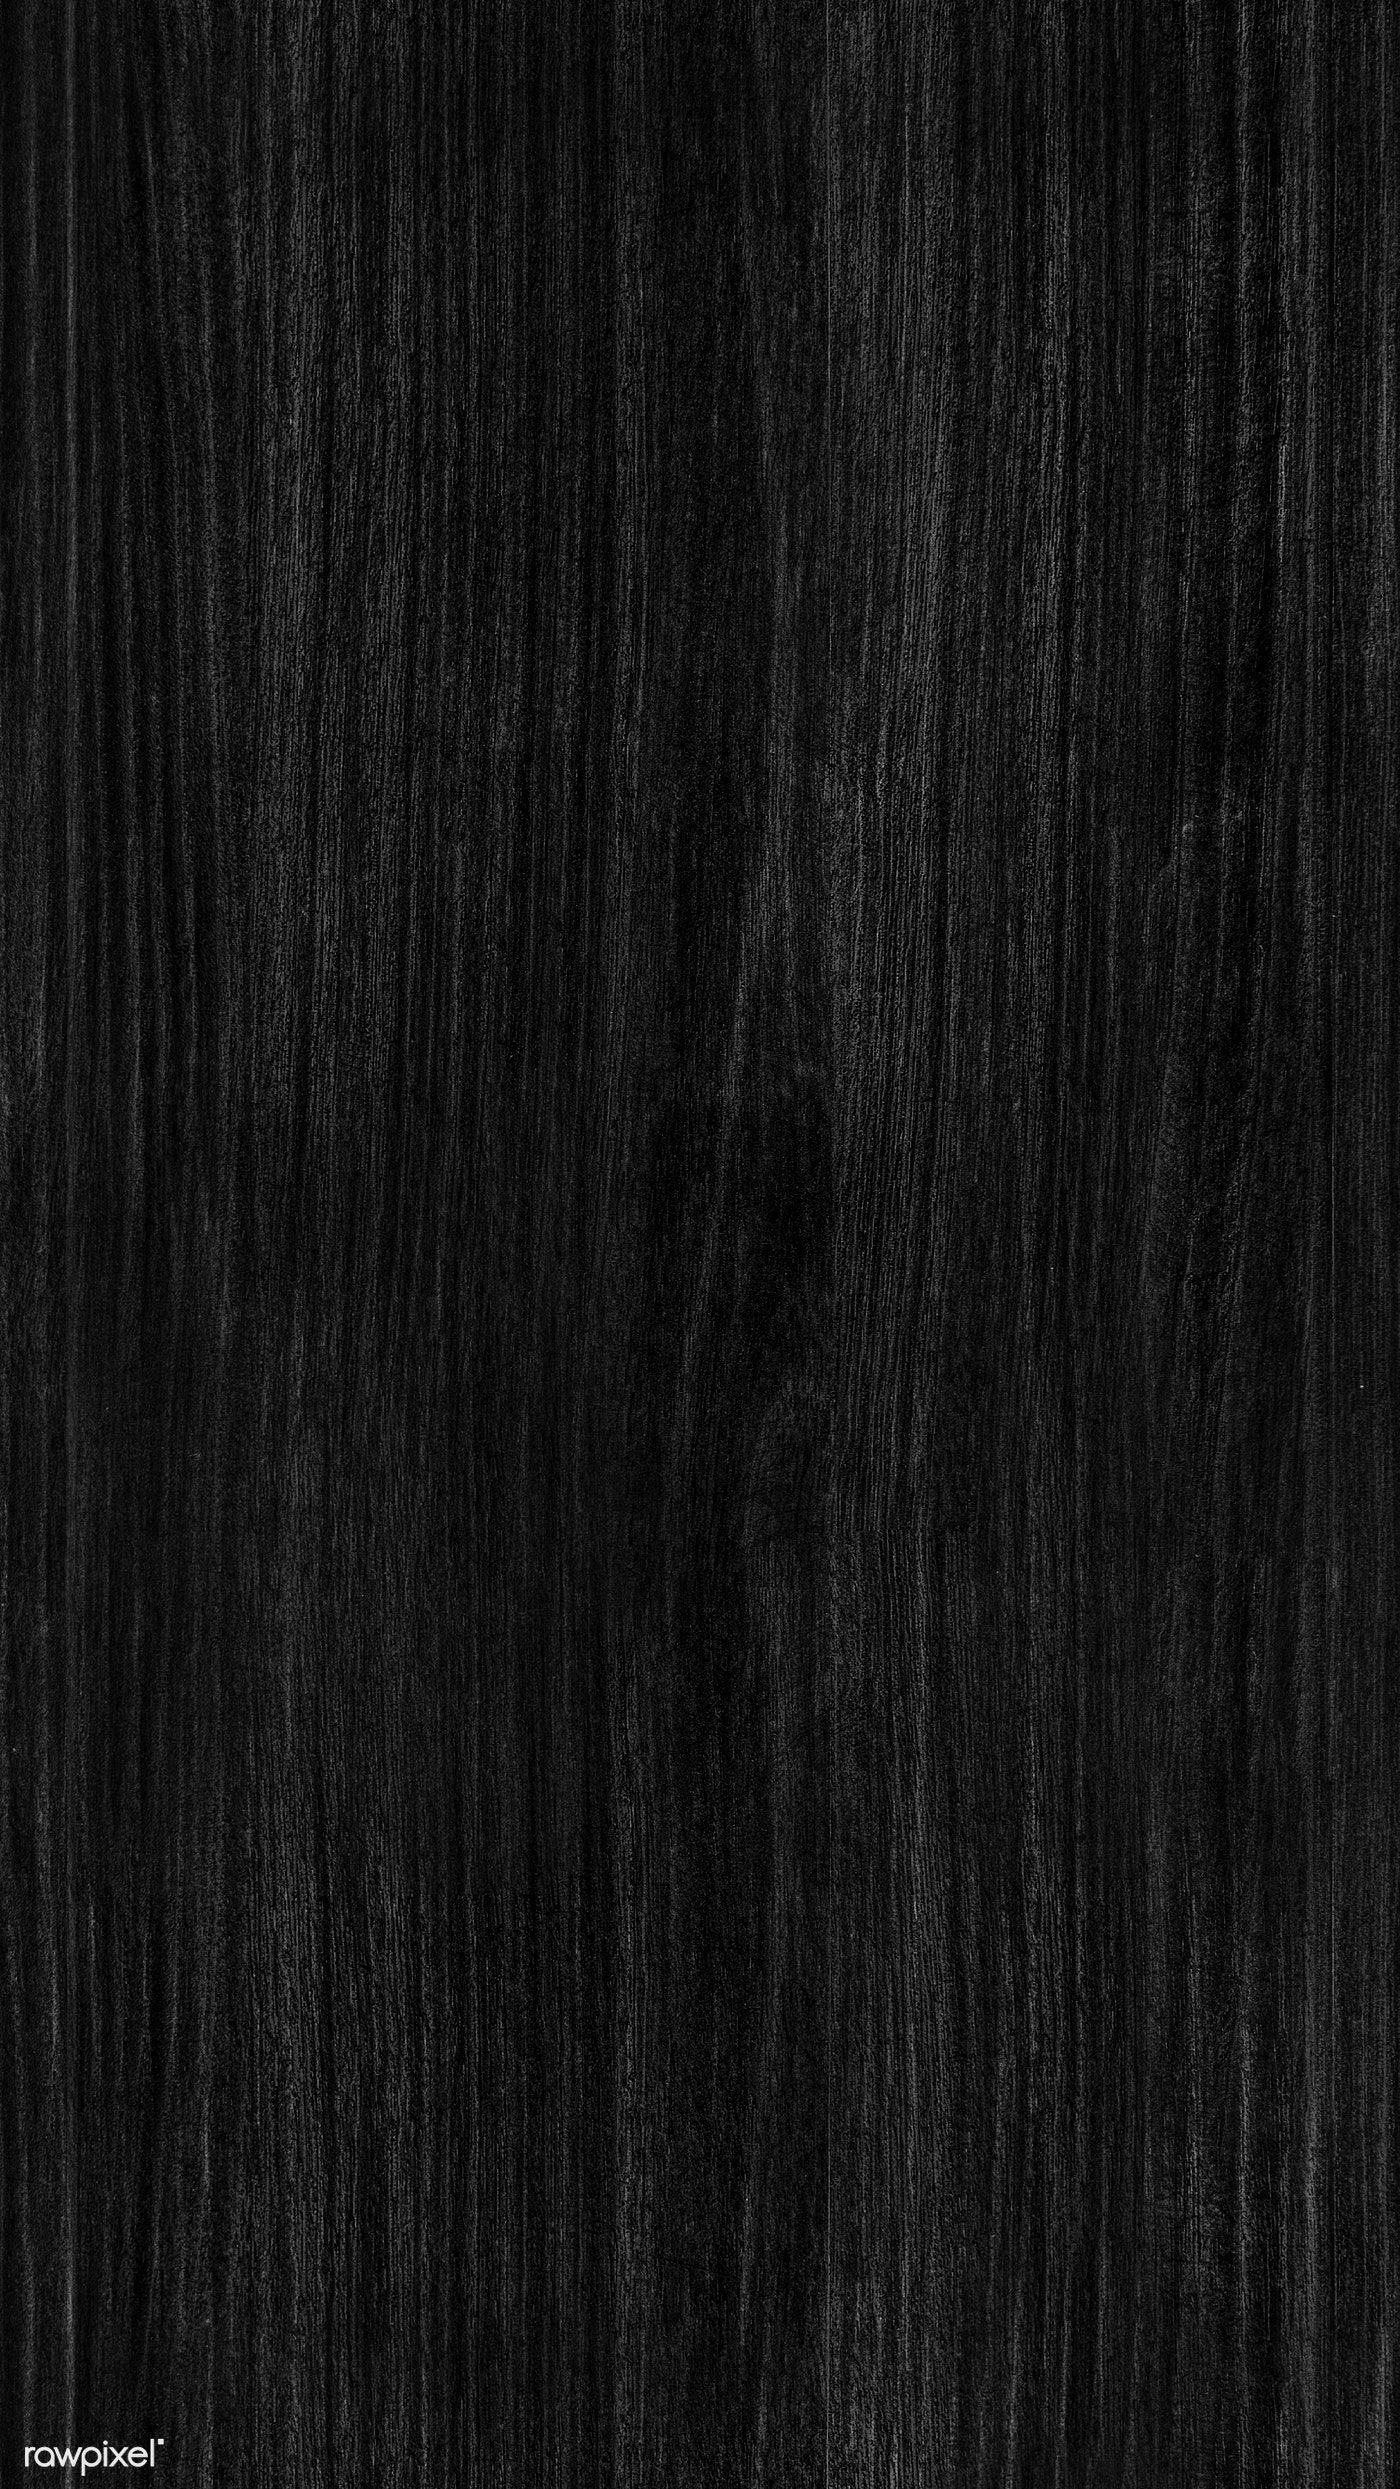 Blank black wooden textured mobile wallpaper background free